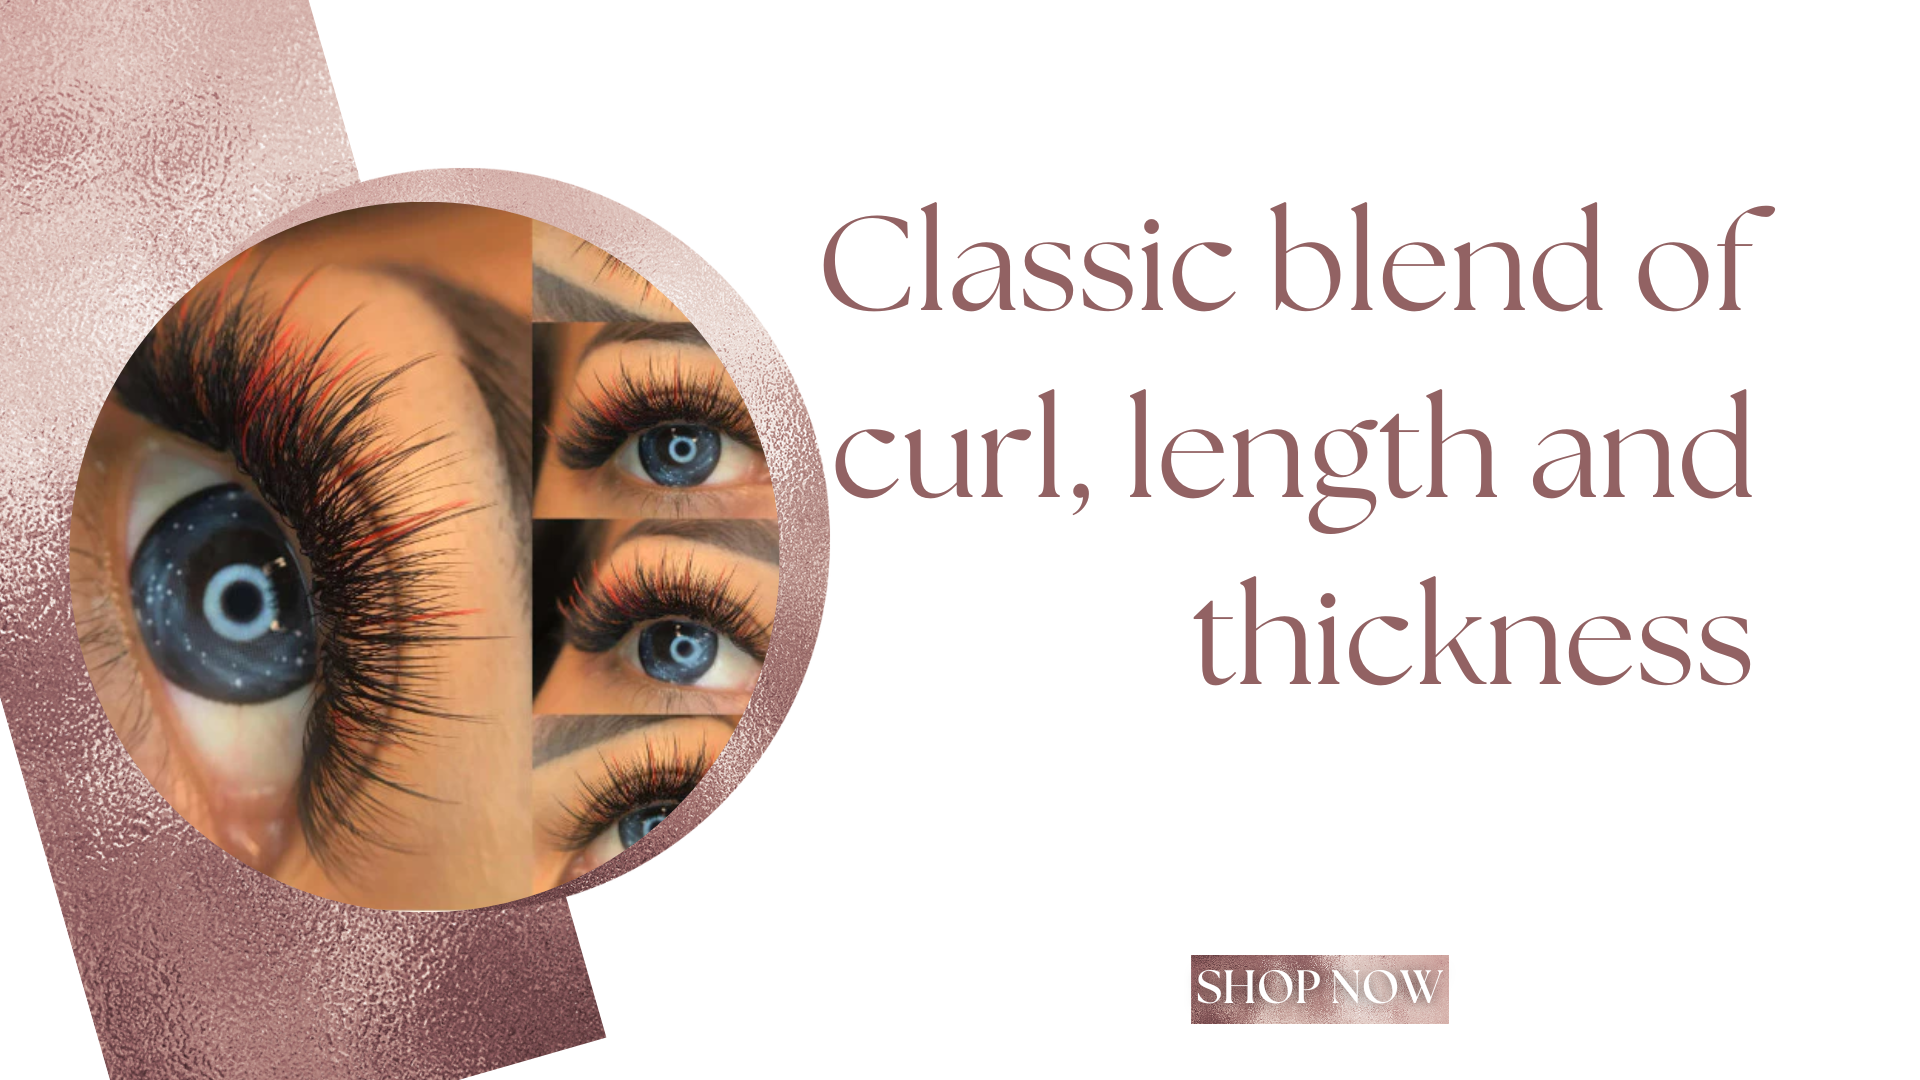  Classic blend of curl, length and thickness